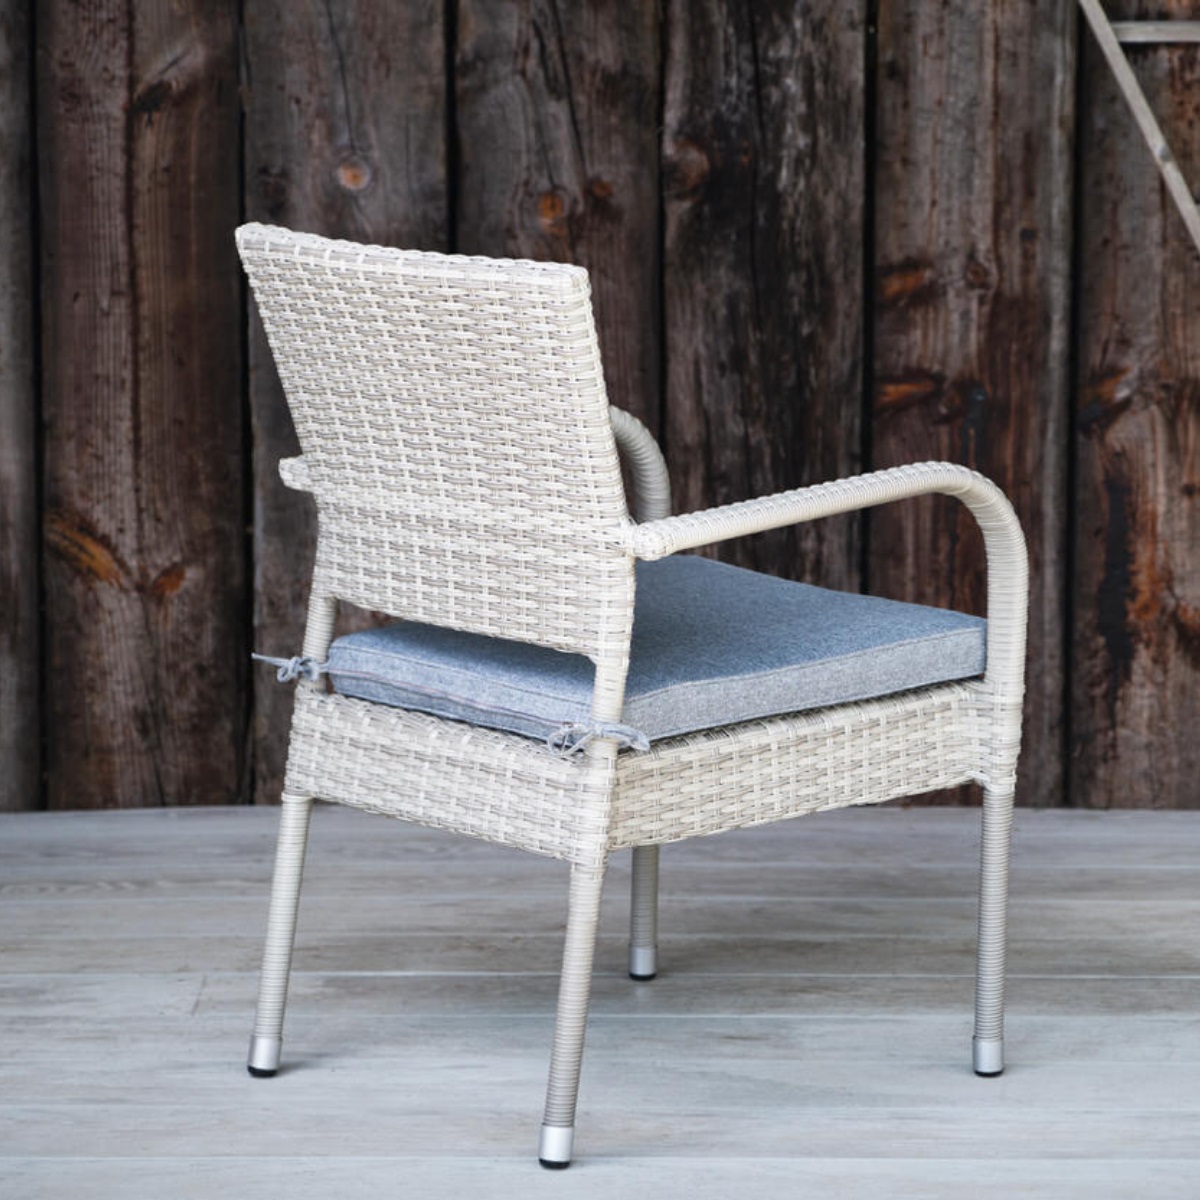 Commercial Outdoor Rattan Dining Chair | Ideal for Pubs, Hotels and